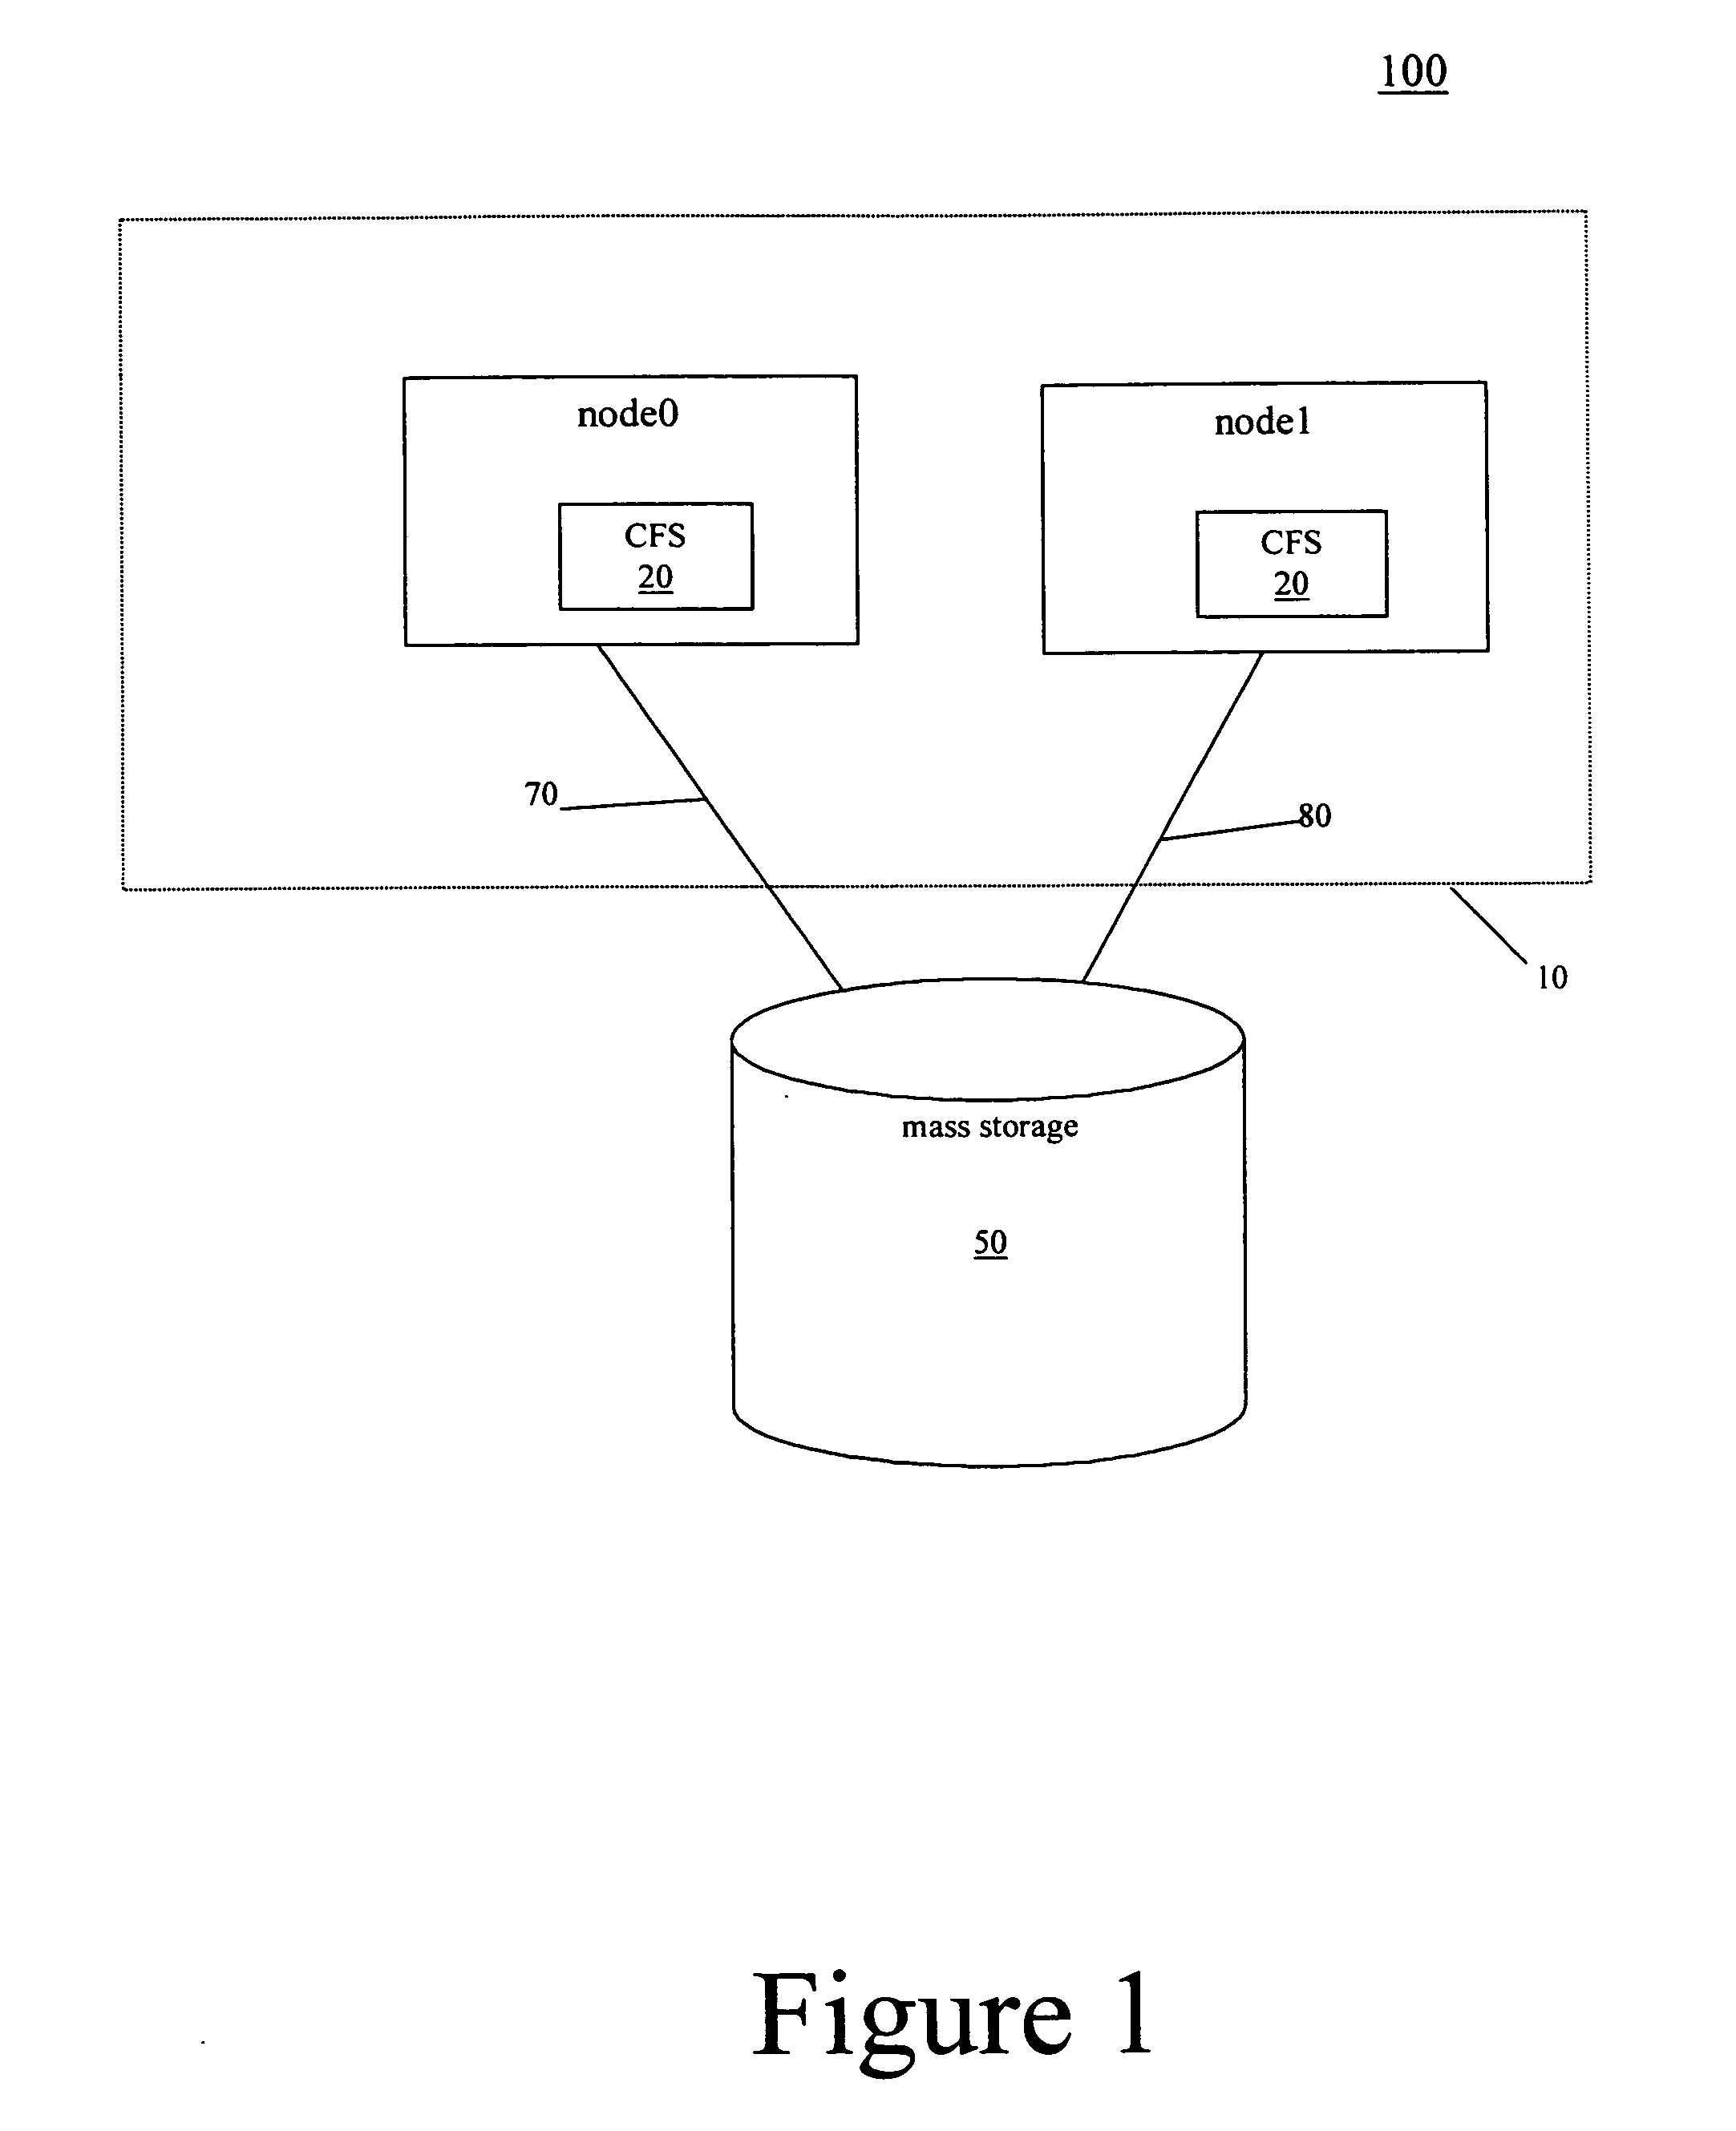 Method of providing shared objects and node-specific objects in a cluster file system